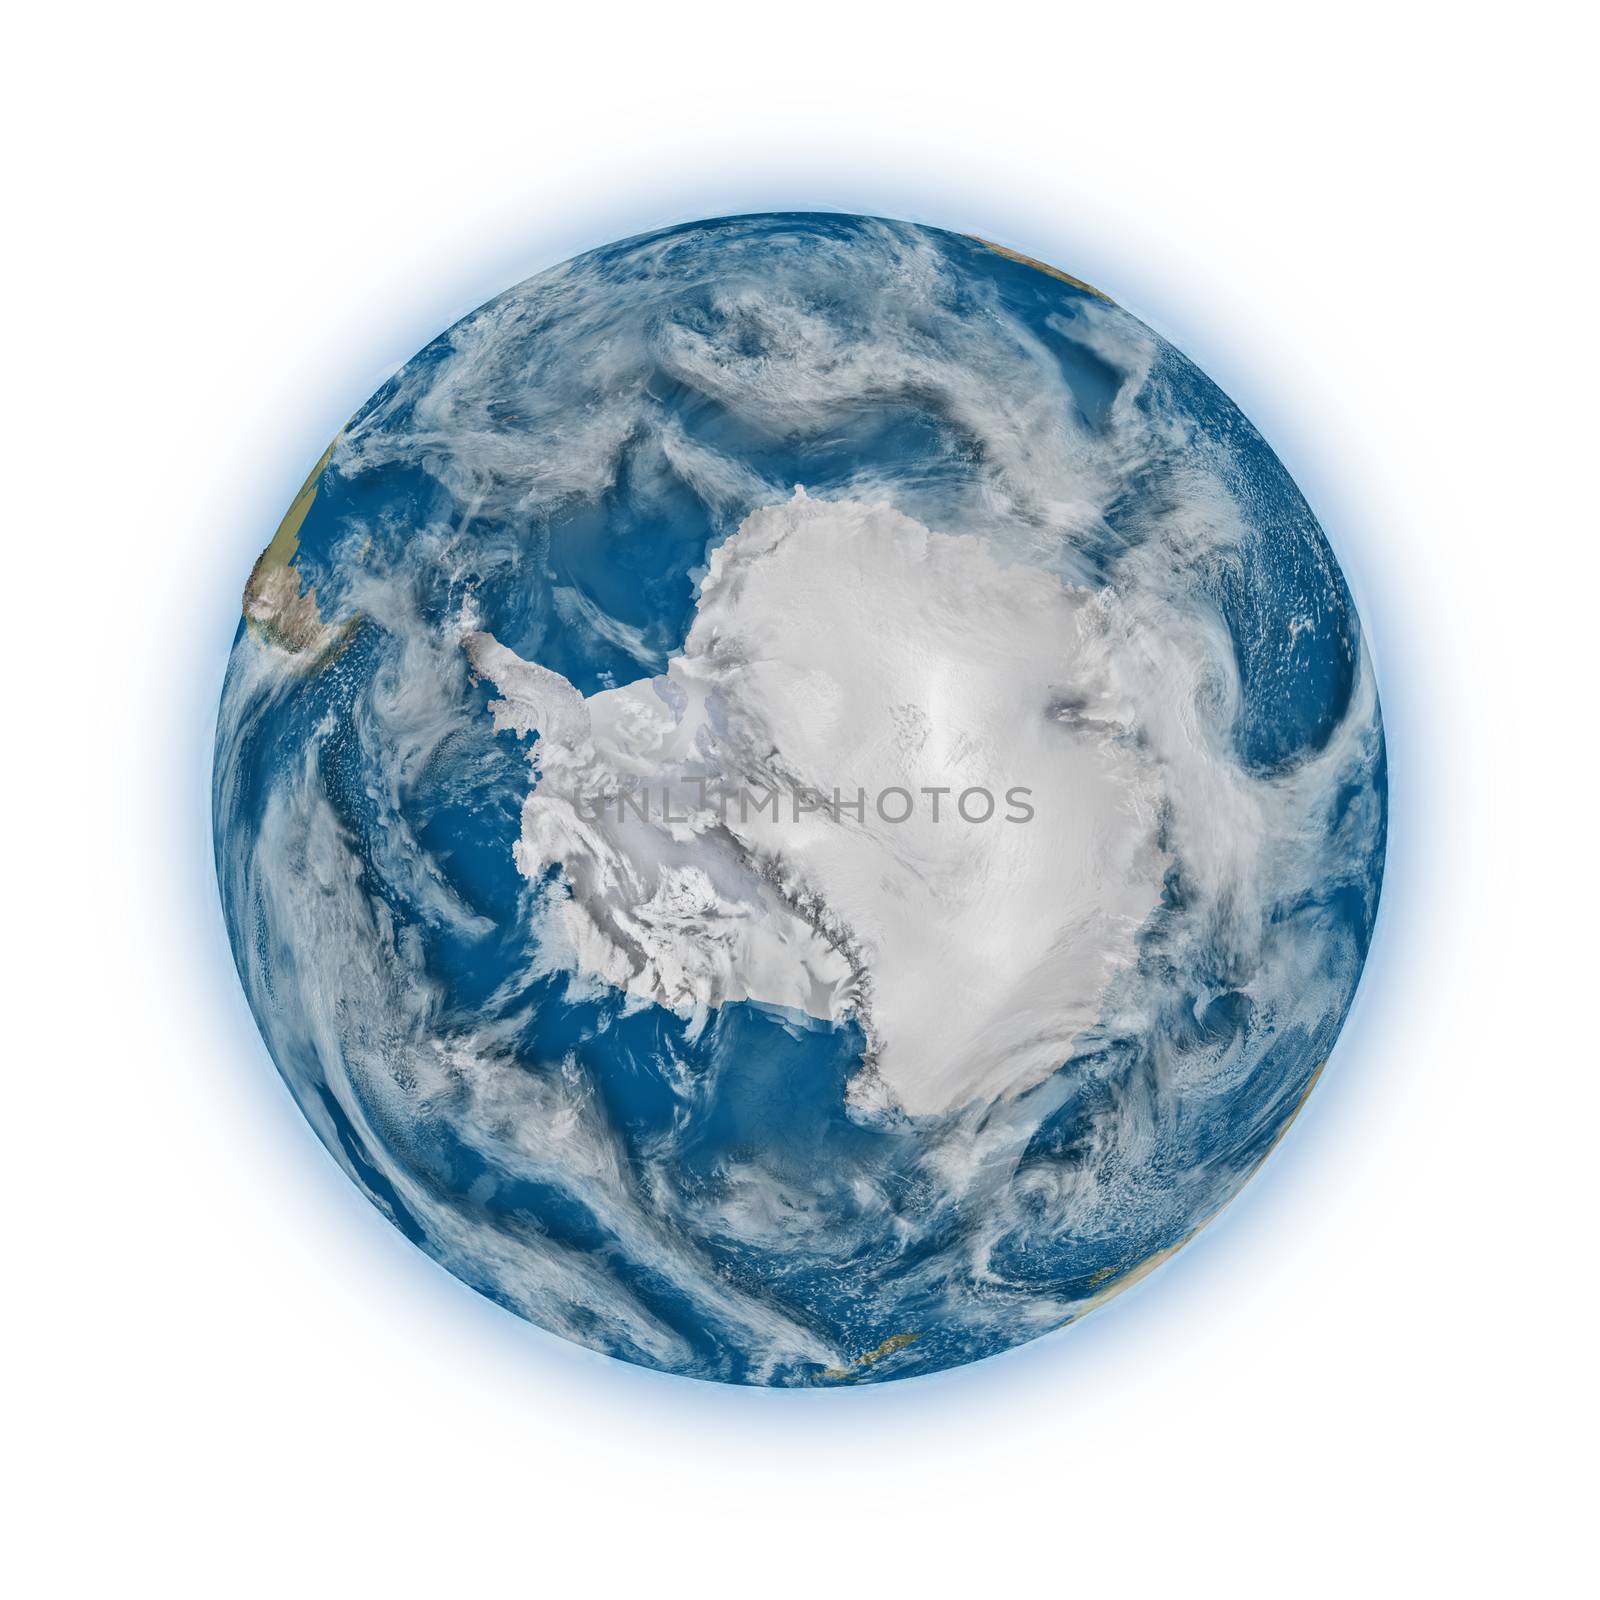 Antarctica on planet Earth by Harvepino